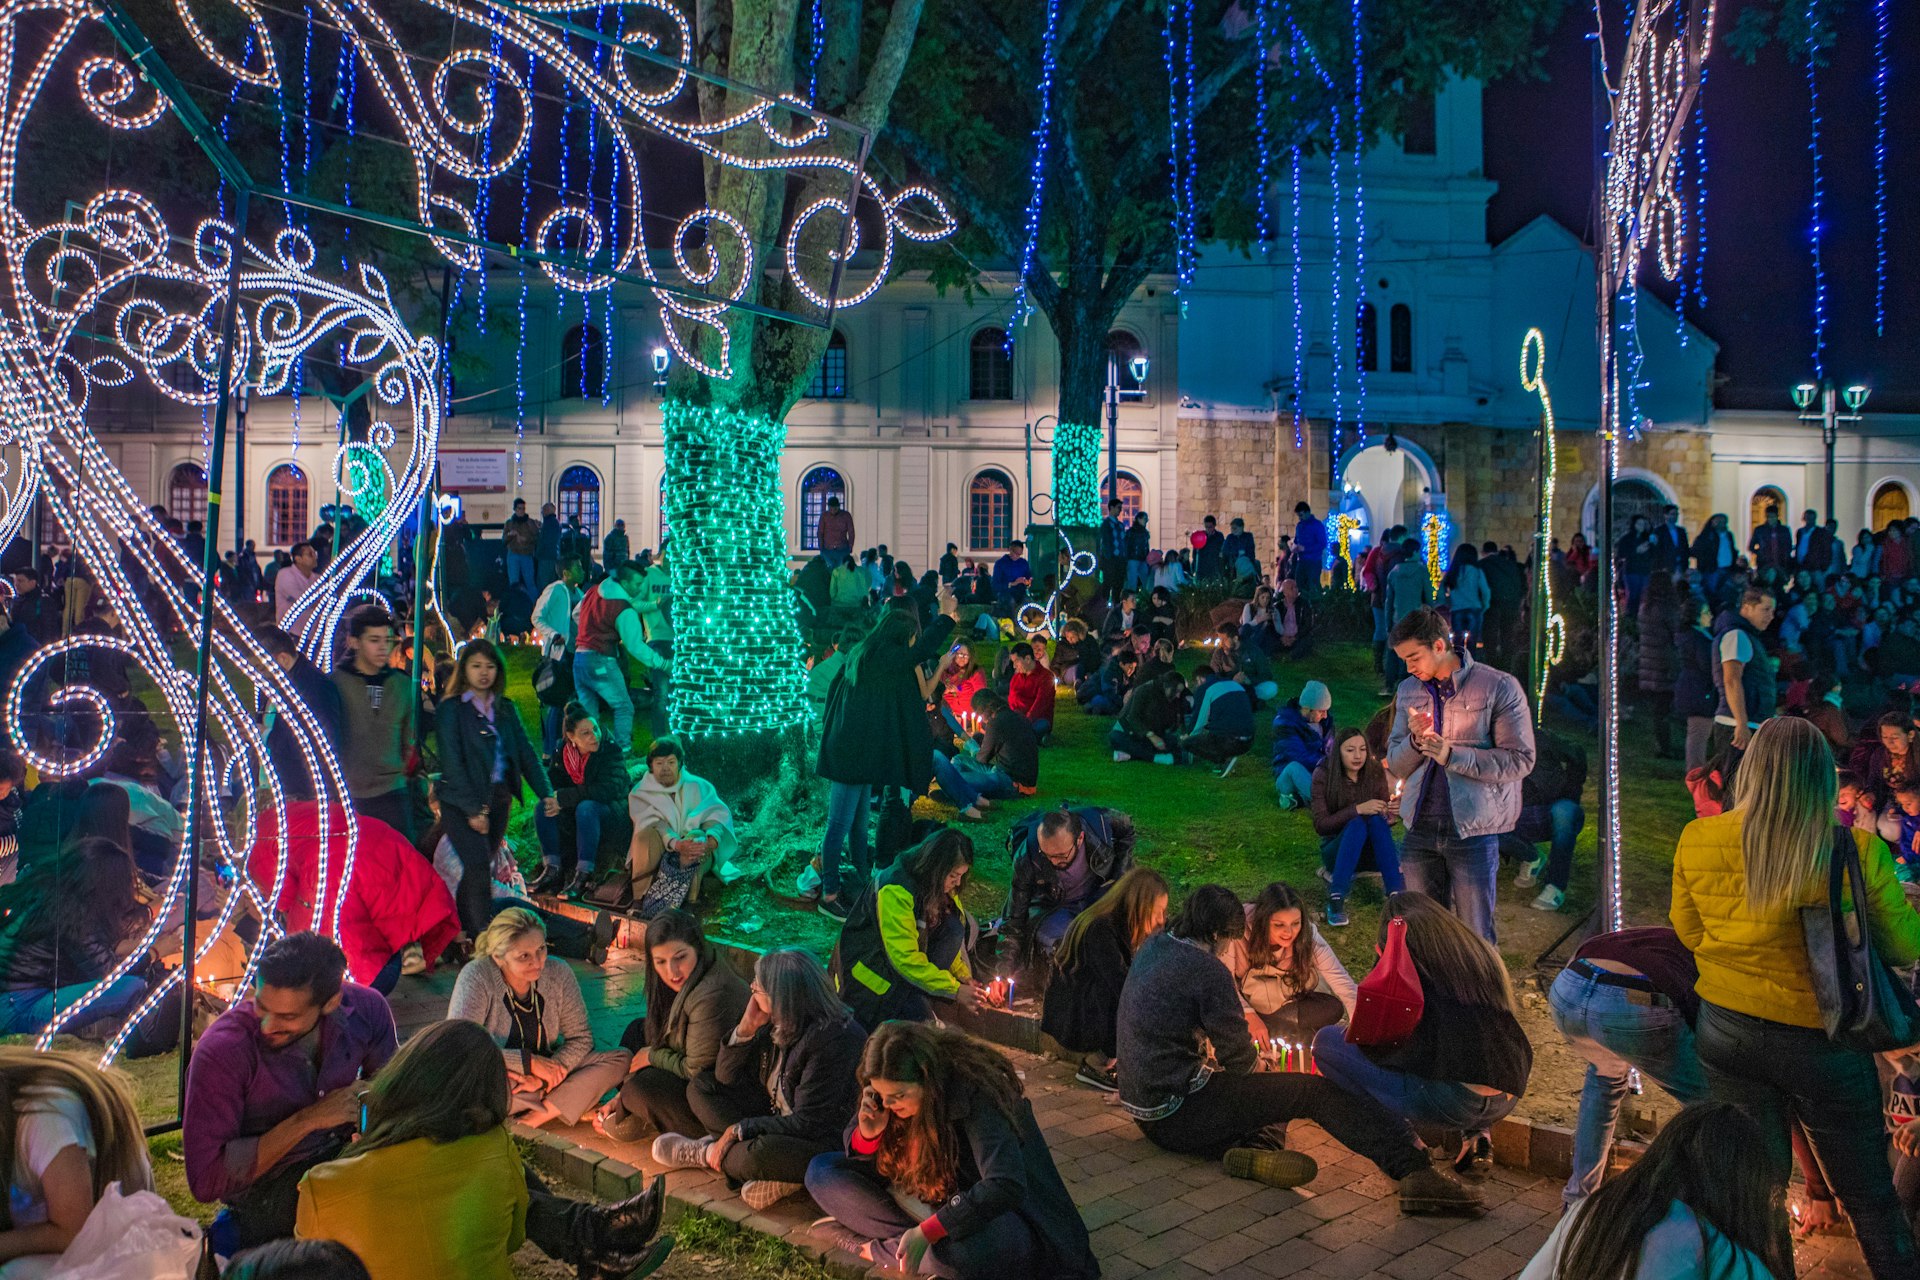 Crowds of people celebrate Dia de Las Velitas by lighting candles and enjoying green Christmas lights wrapped around tree trunks, strands of blue lights dangling from the trees like moss, and white light sculptures in the shape of curlicues and vines standing upright by the sidewalk. In the background are tall white colonial-era stone buildings. 